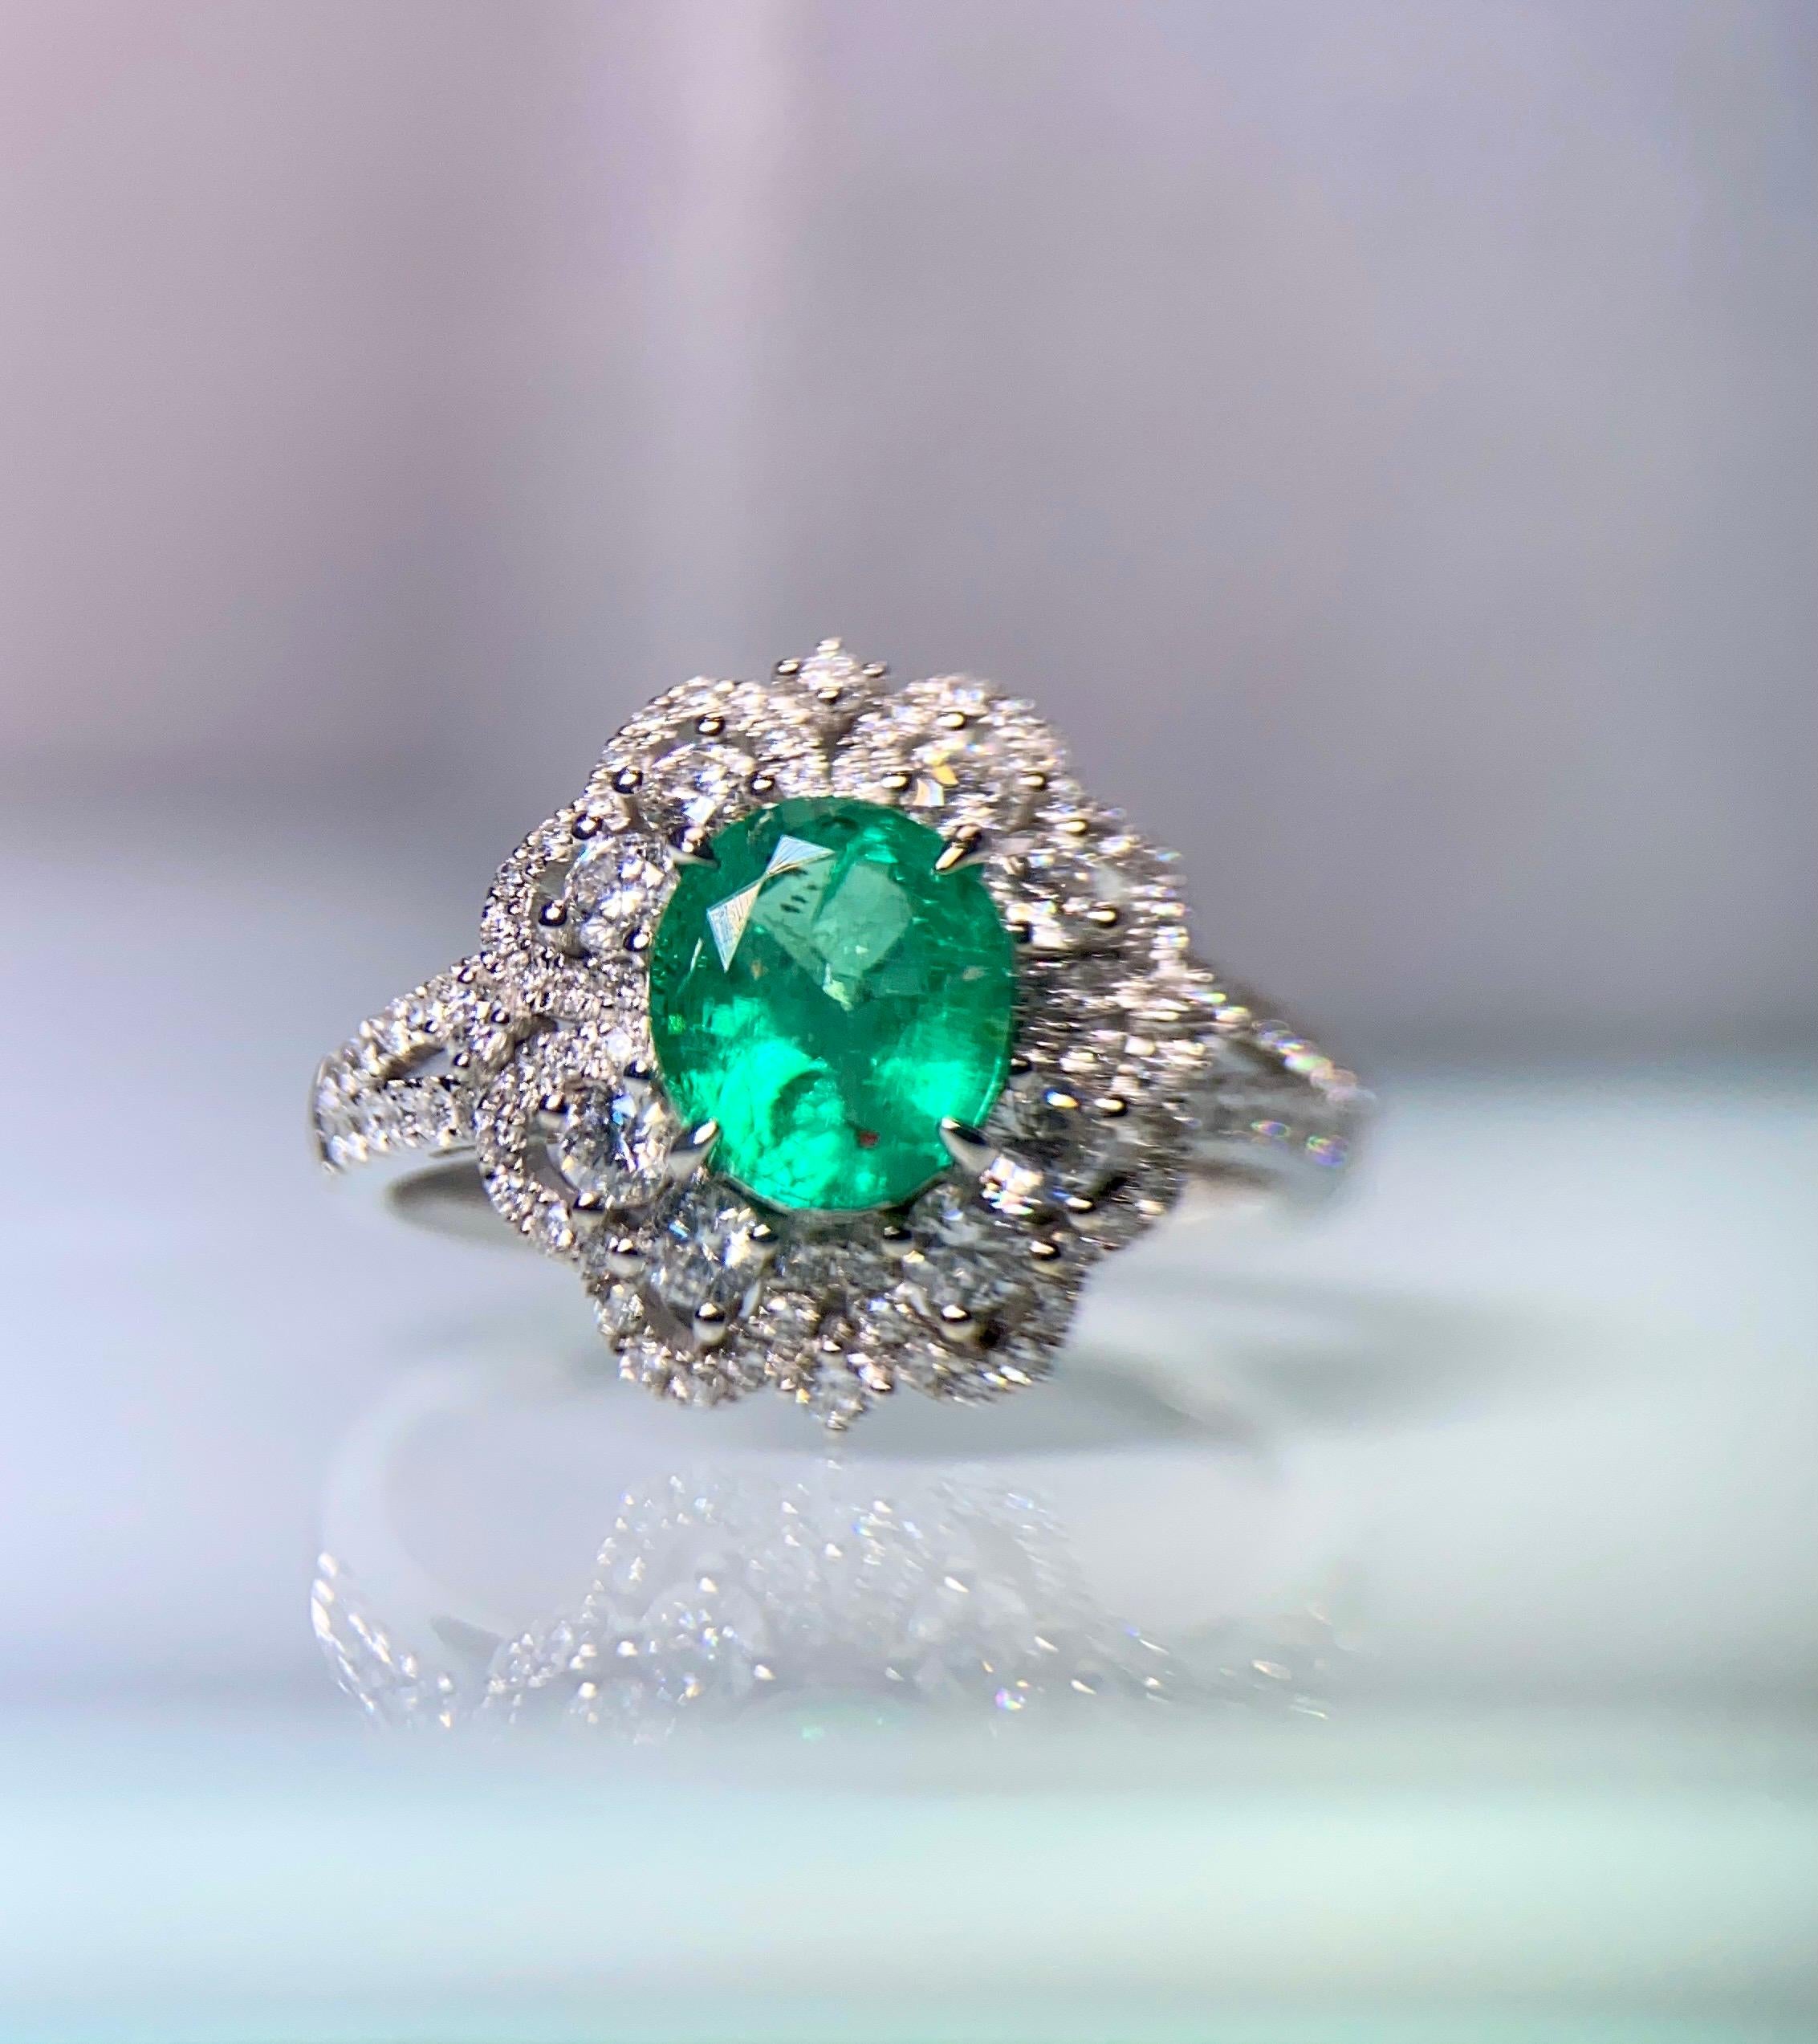 This is a flower motif clustered Emerald ring in 18K white Gold. The Emerald is surrounded by multiple diamond pave and there are 8 larger brilliant cut diamond among them. It resembles a vintage Diana setting but with more complicated details,